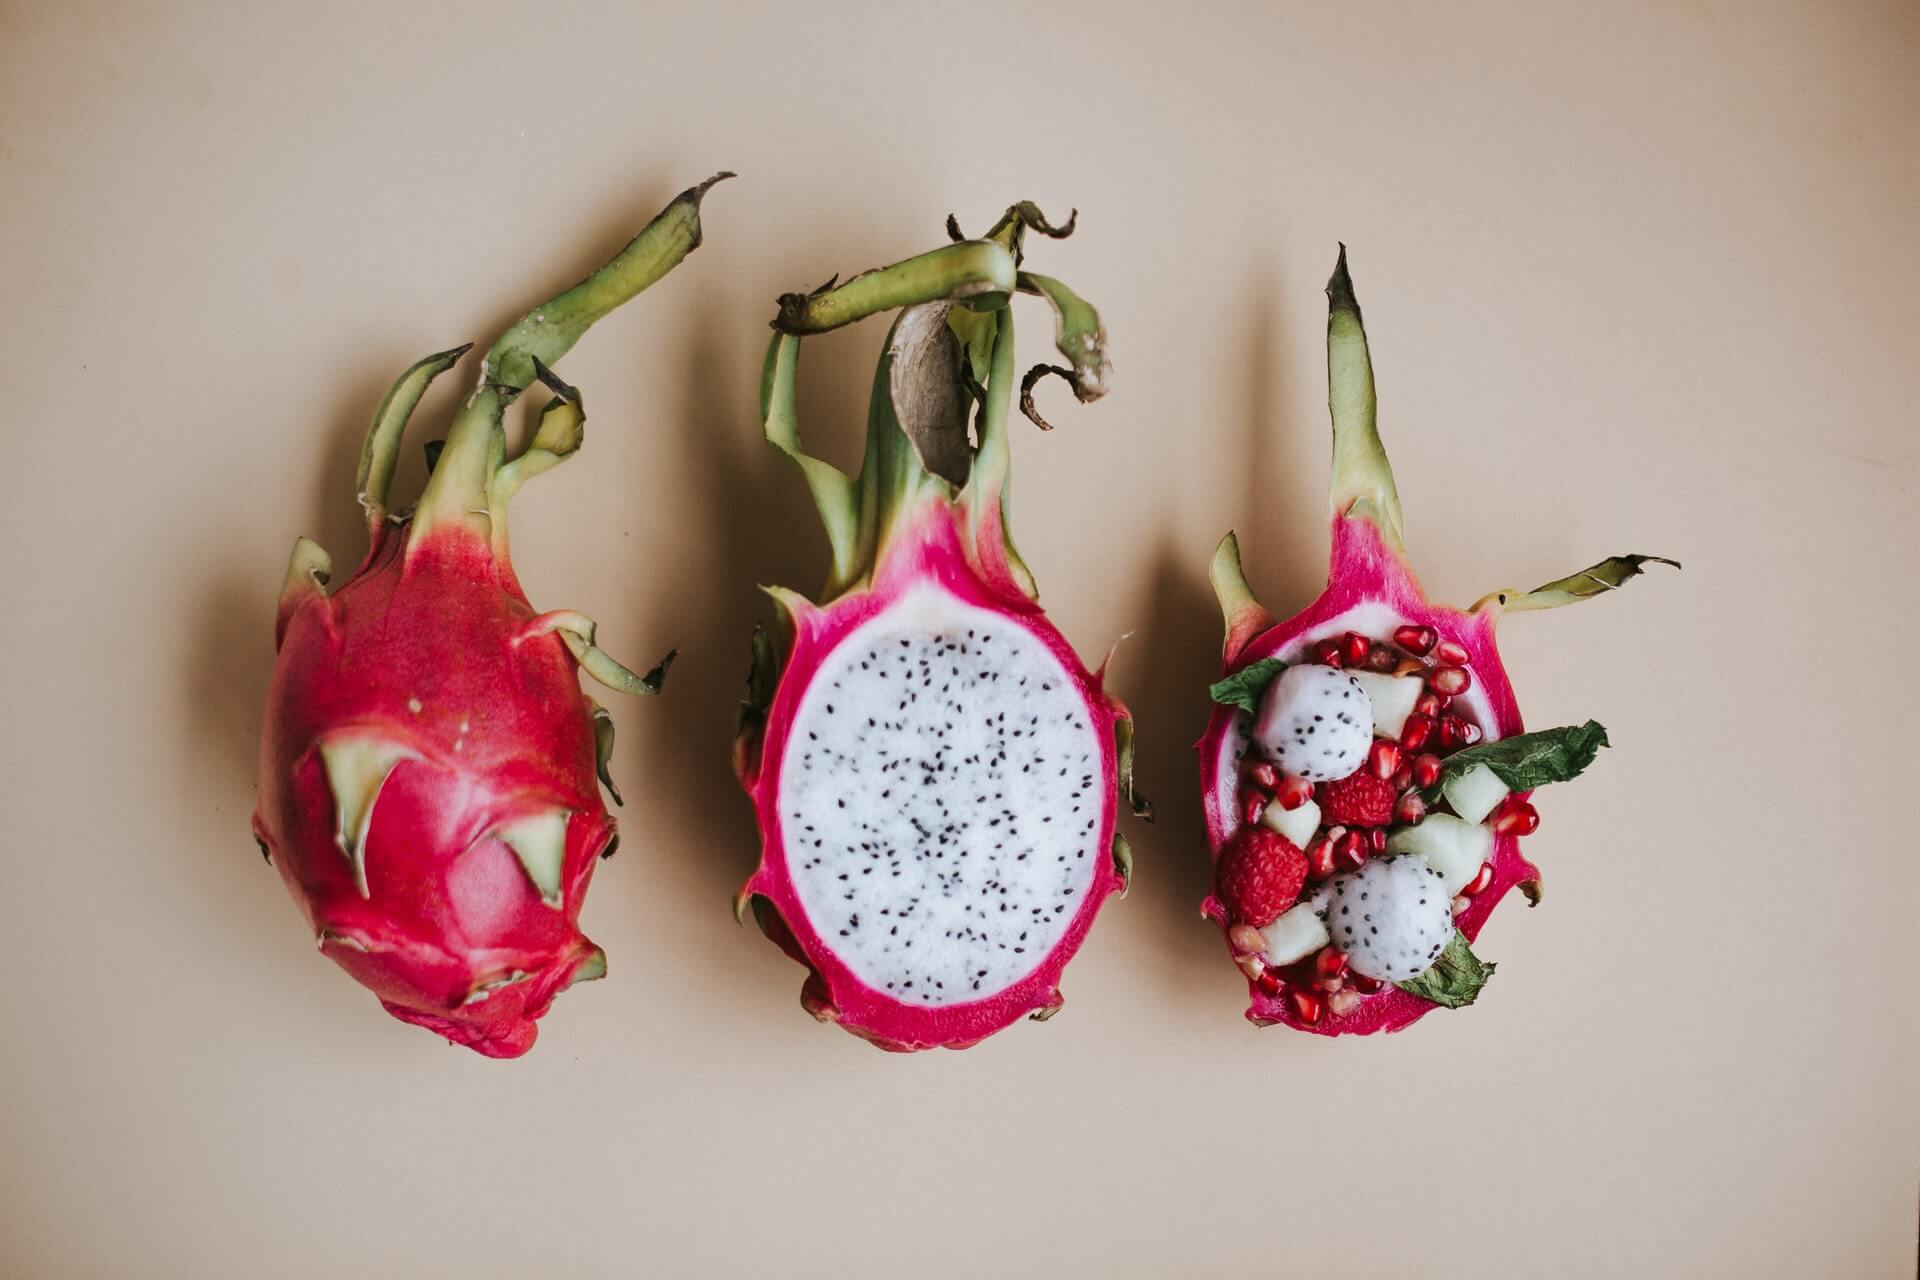 Dragon Fruit grown by farmers of Gujarat West Bengal exported to London